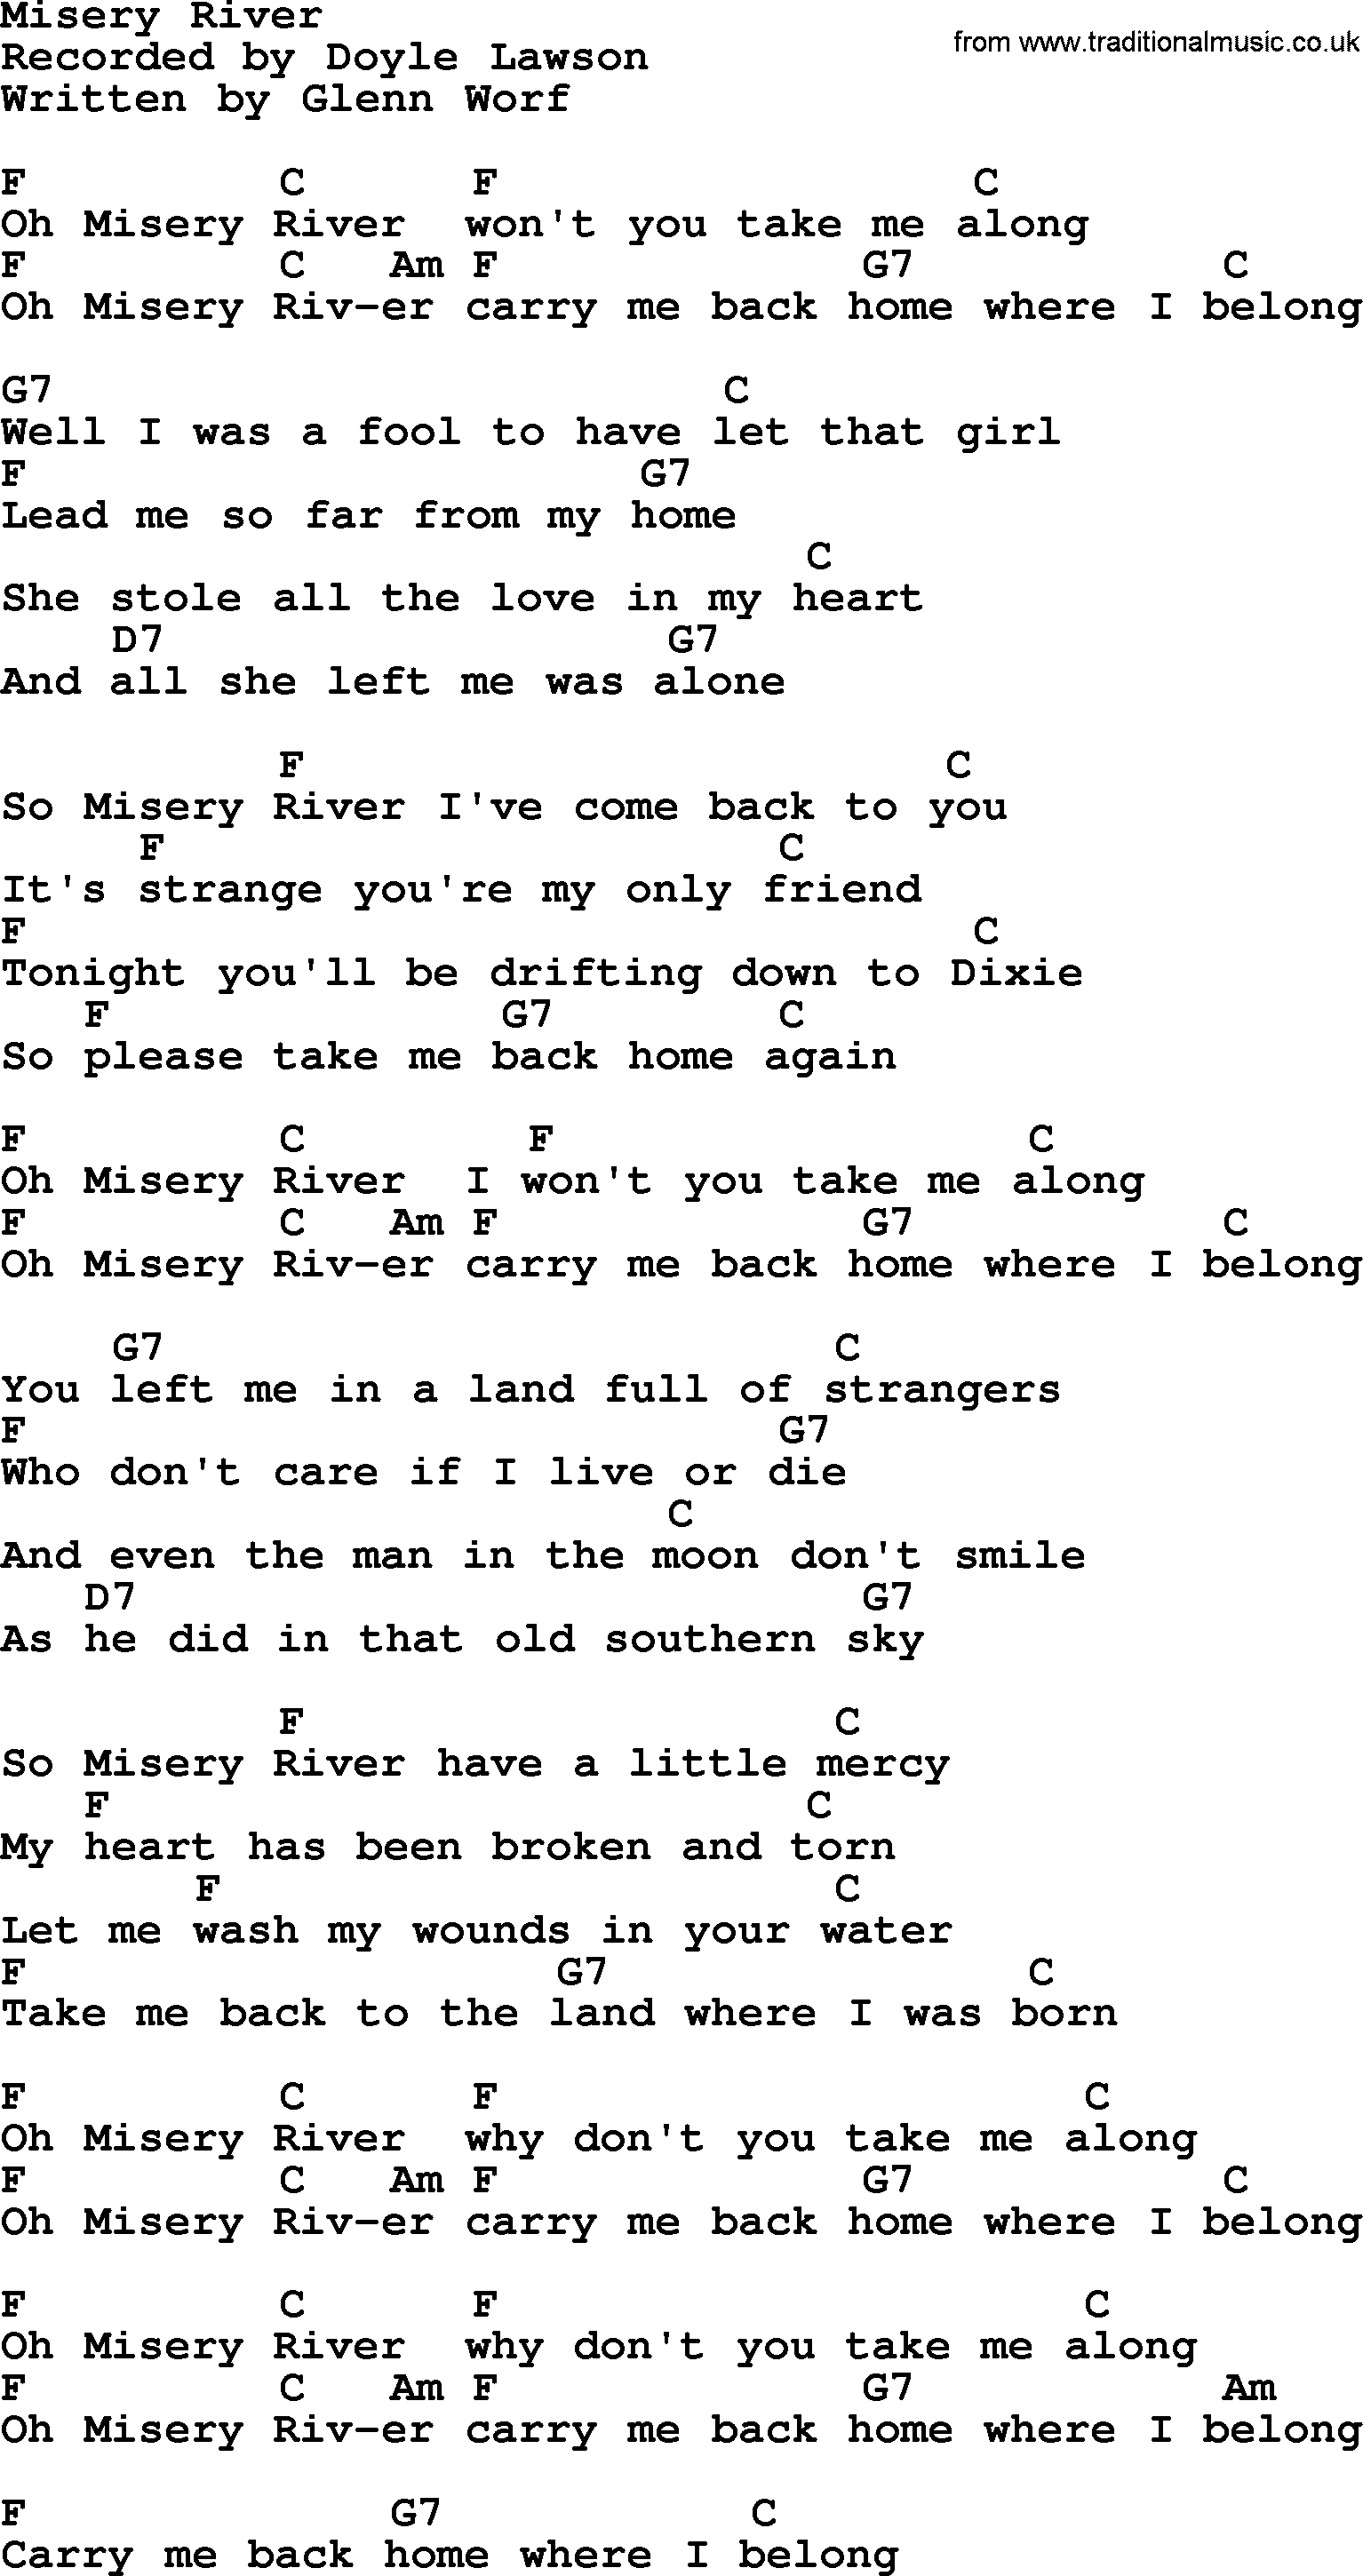 Bluegrass song: Misery River, lyrics and chords